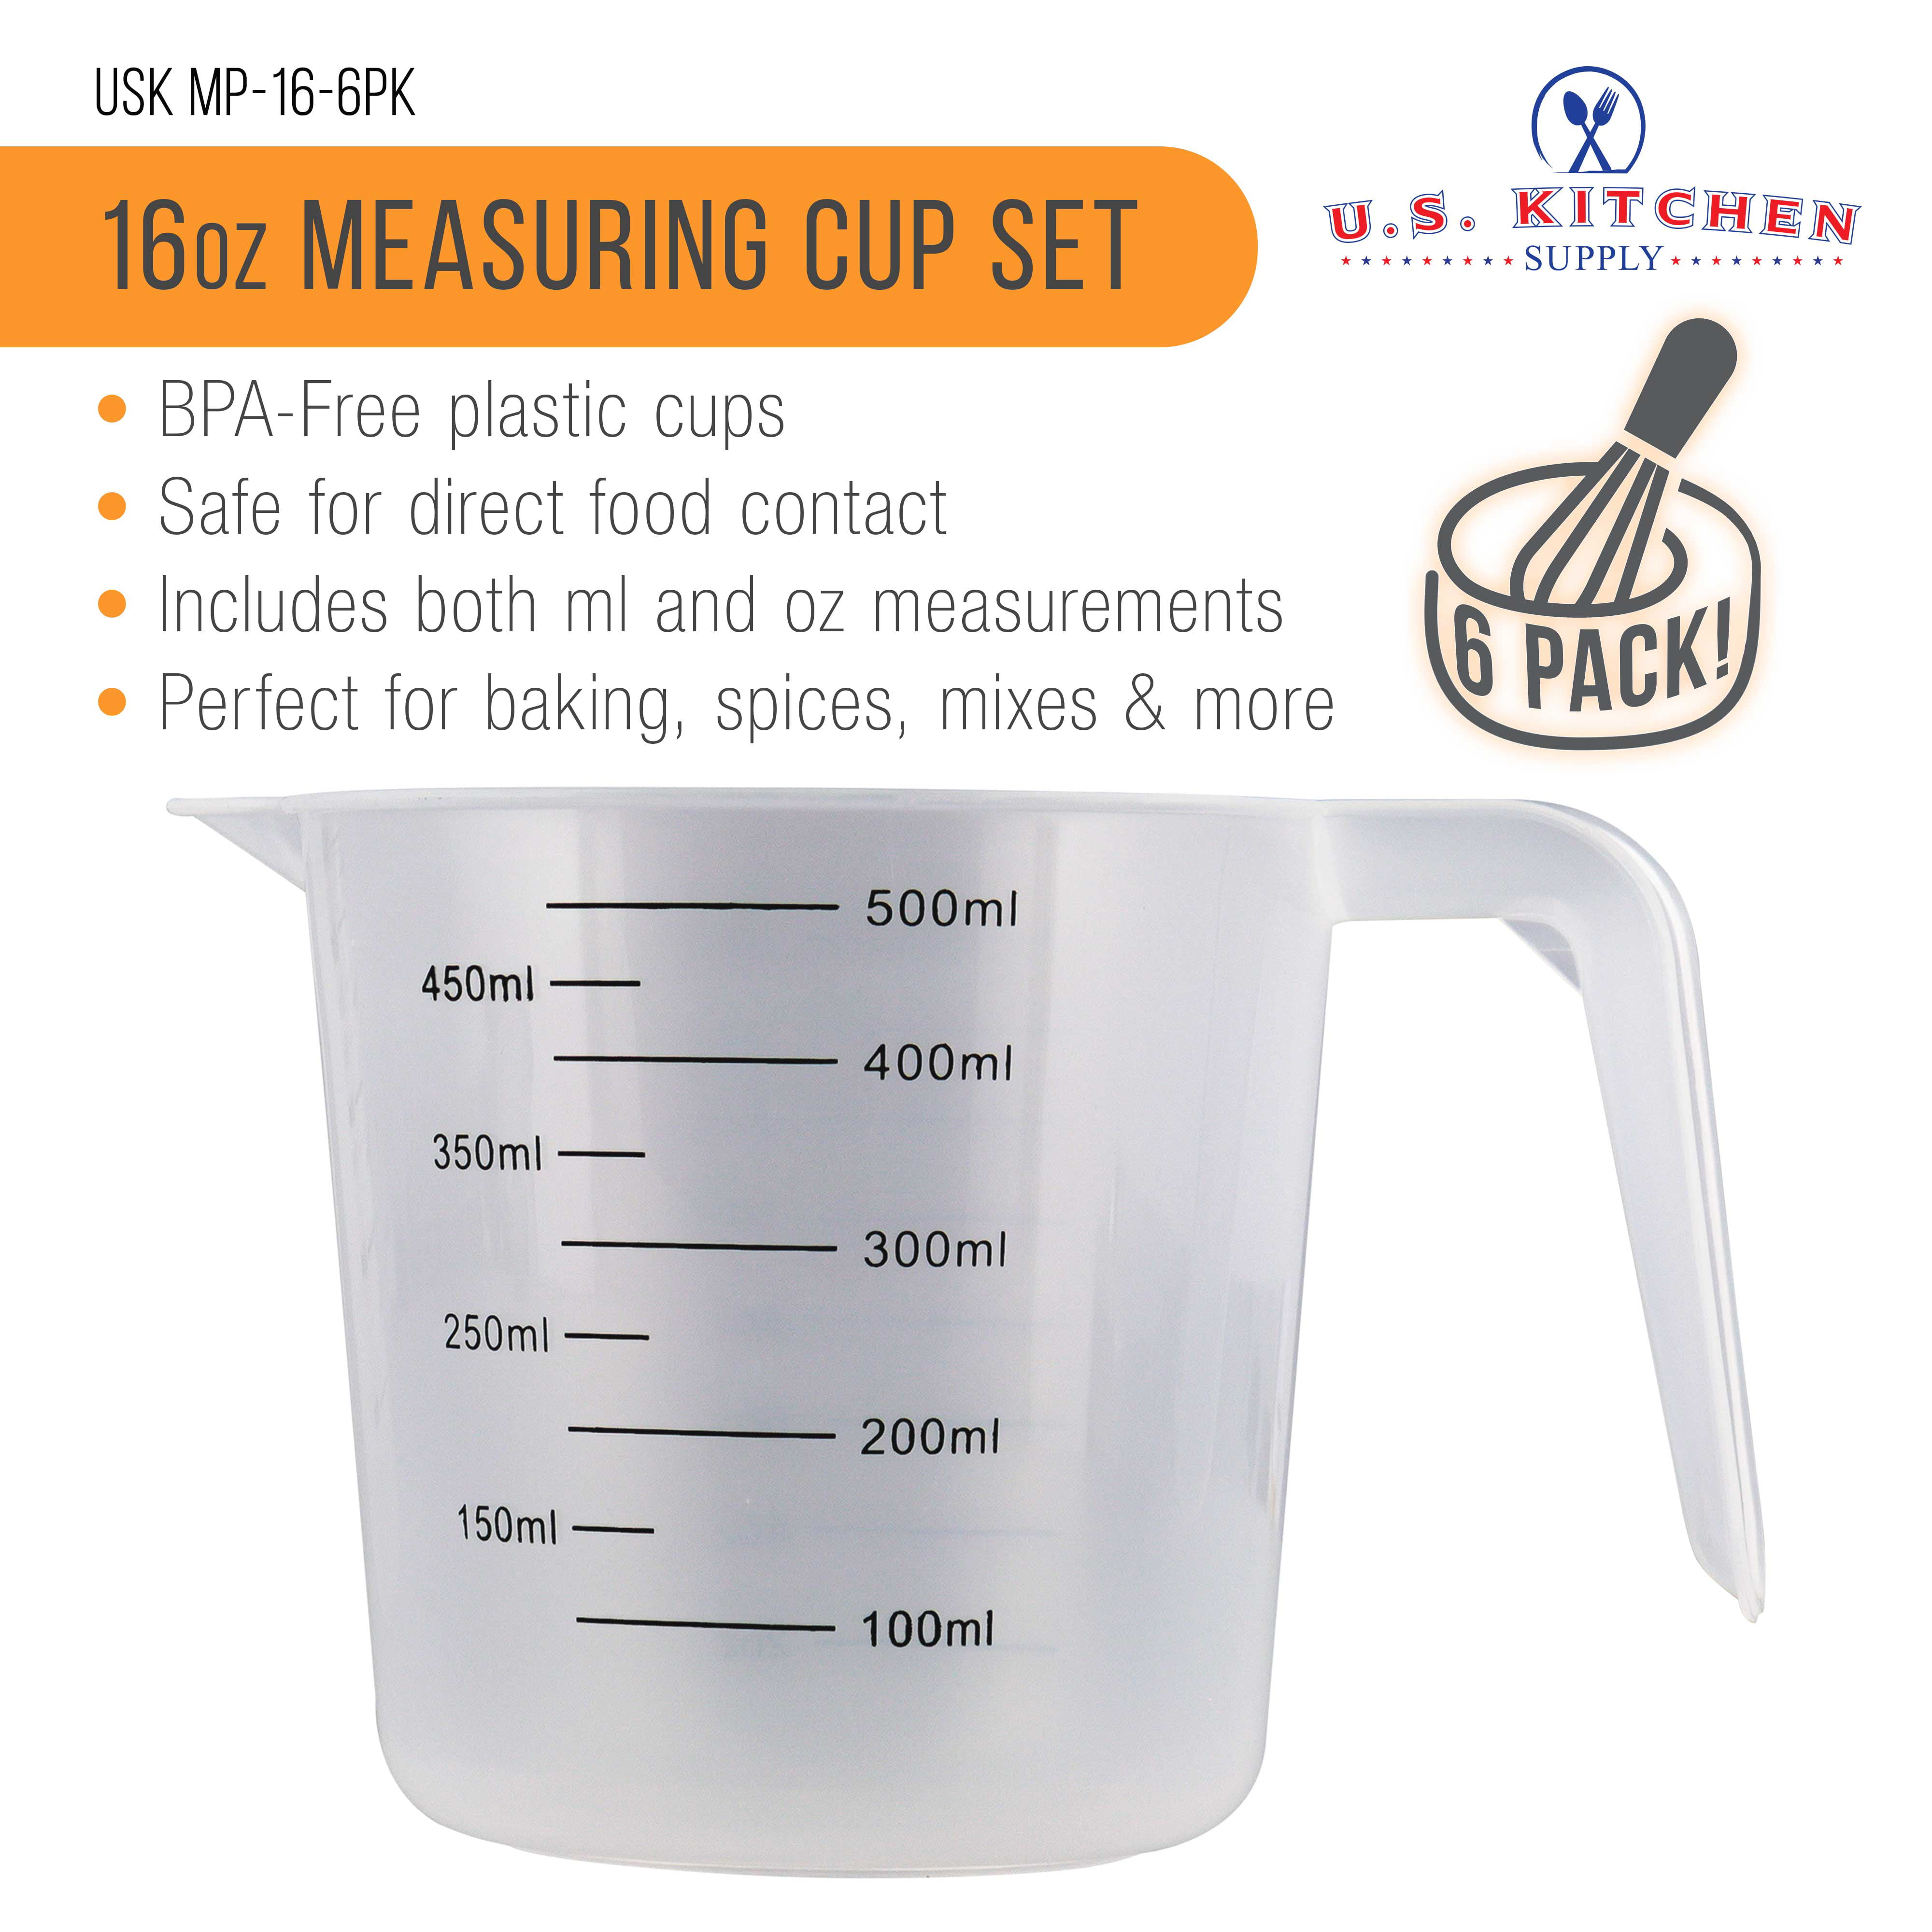 Visual Measuring Cups - Shape Indicates the Size